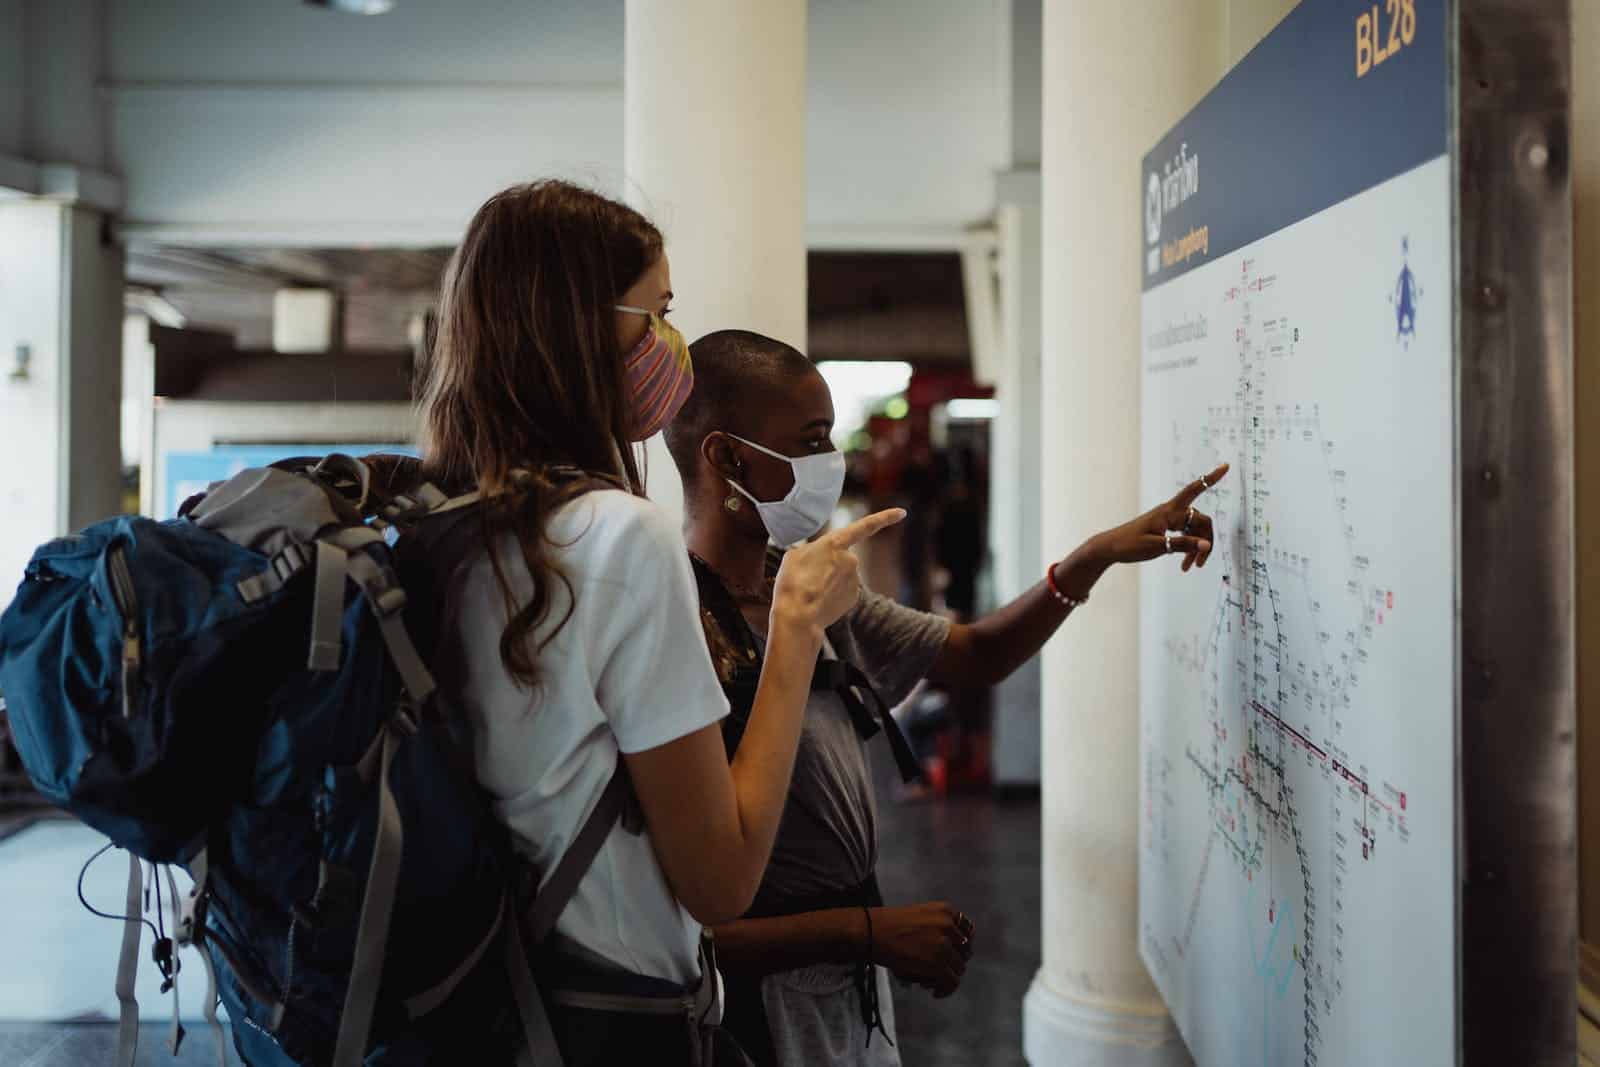 Photograph of Tourists Pointing at a Map